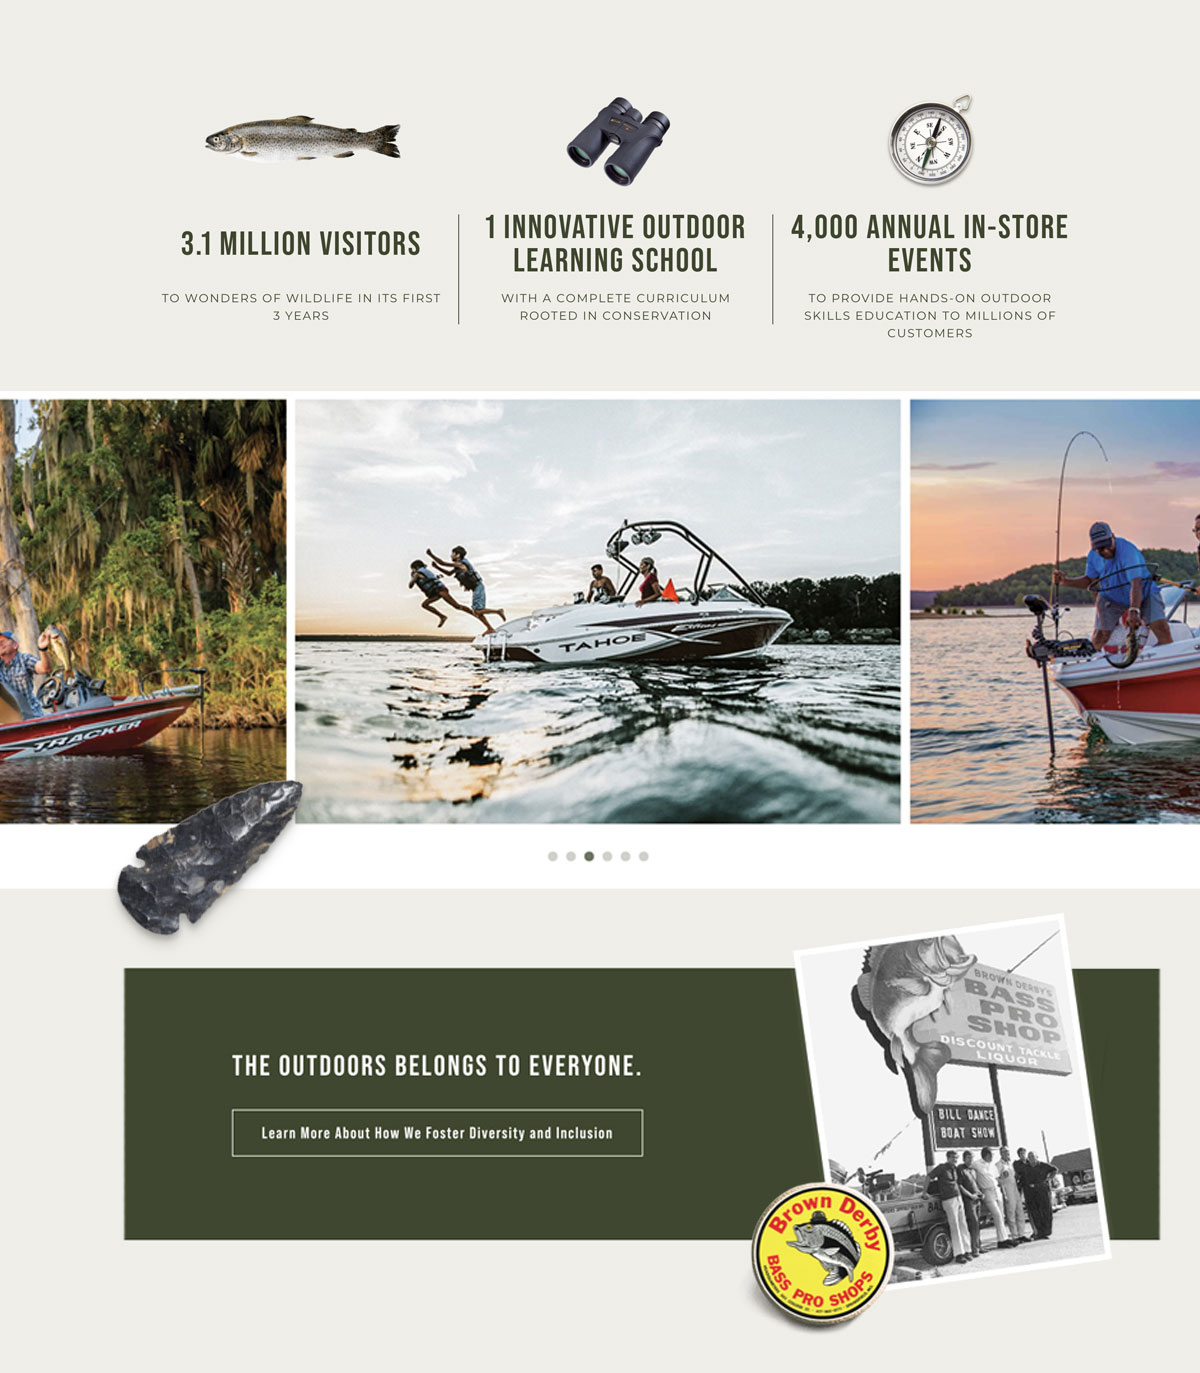 See what Bill Dance Outdoors and Bass Pro Shops are doing now!